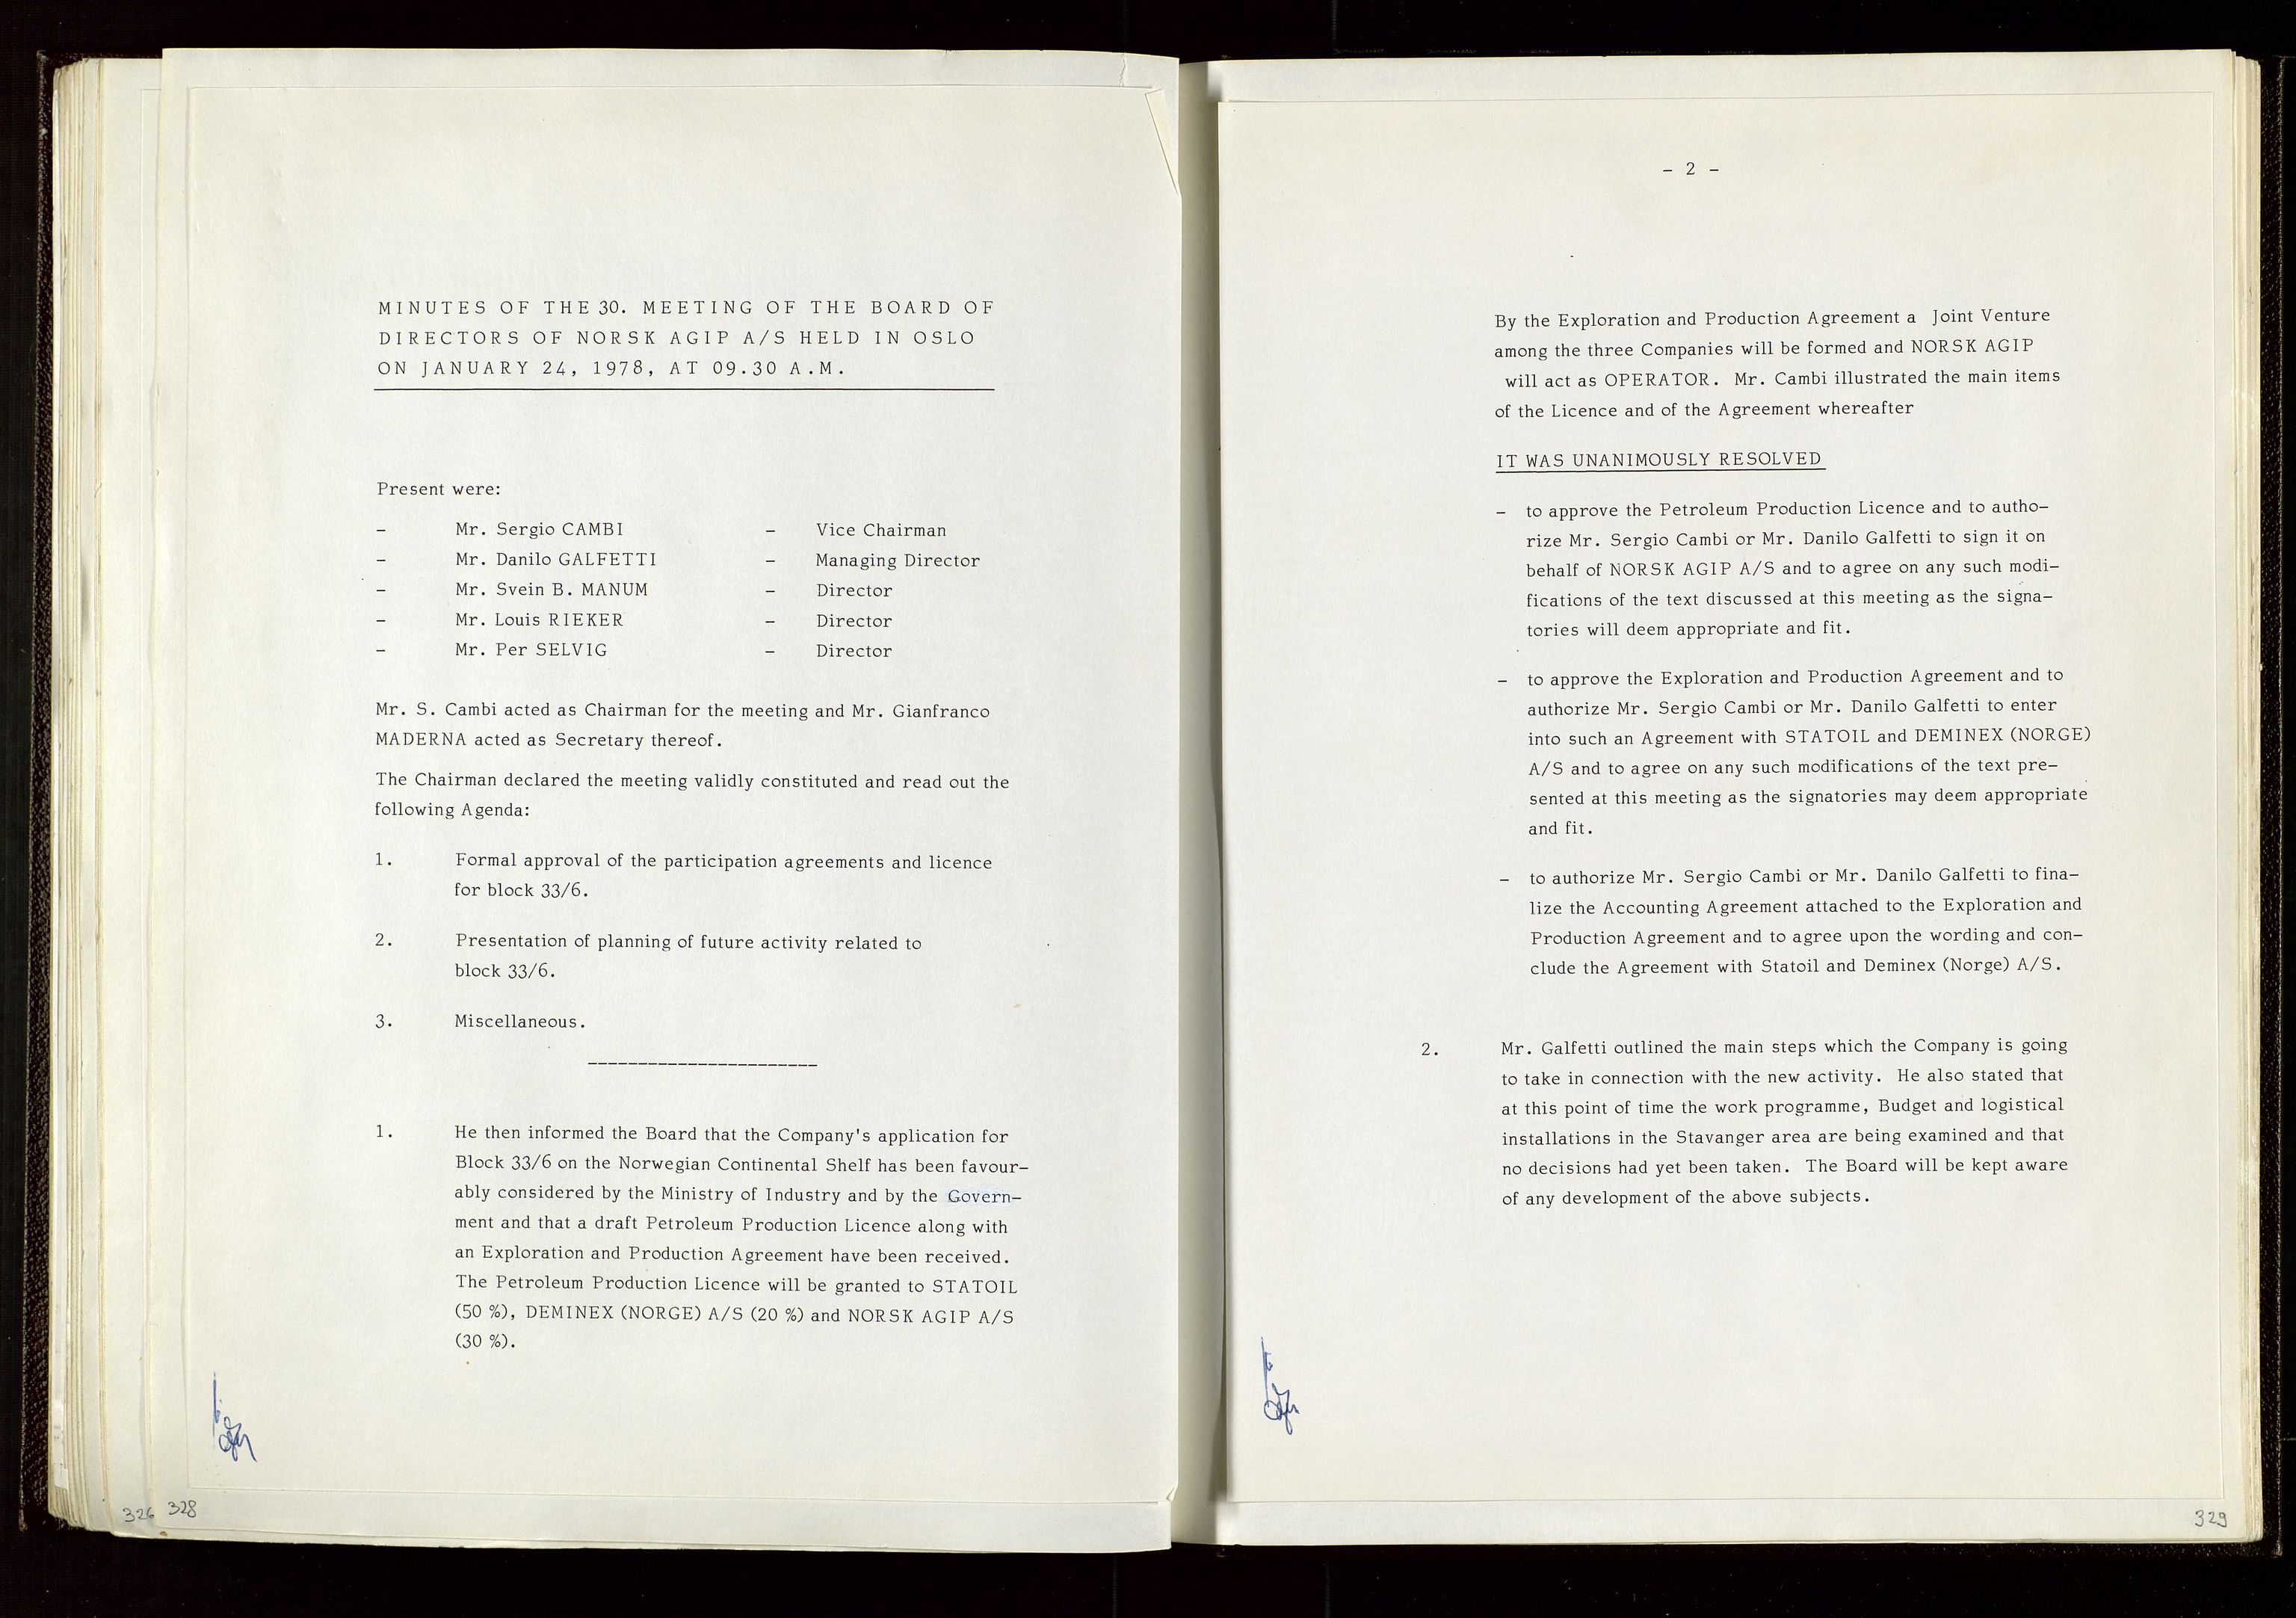 Pa 1583 - Norsk Agip AS, SAST/A-102138/A/Aa/L0002: General assembly and Board of Directors meeting minutes, 1972-1979, p. 328-329